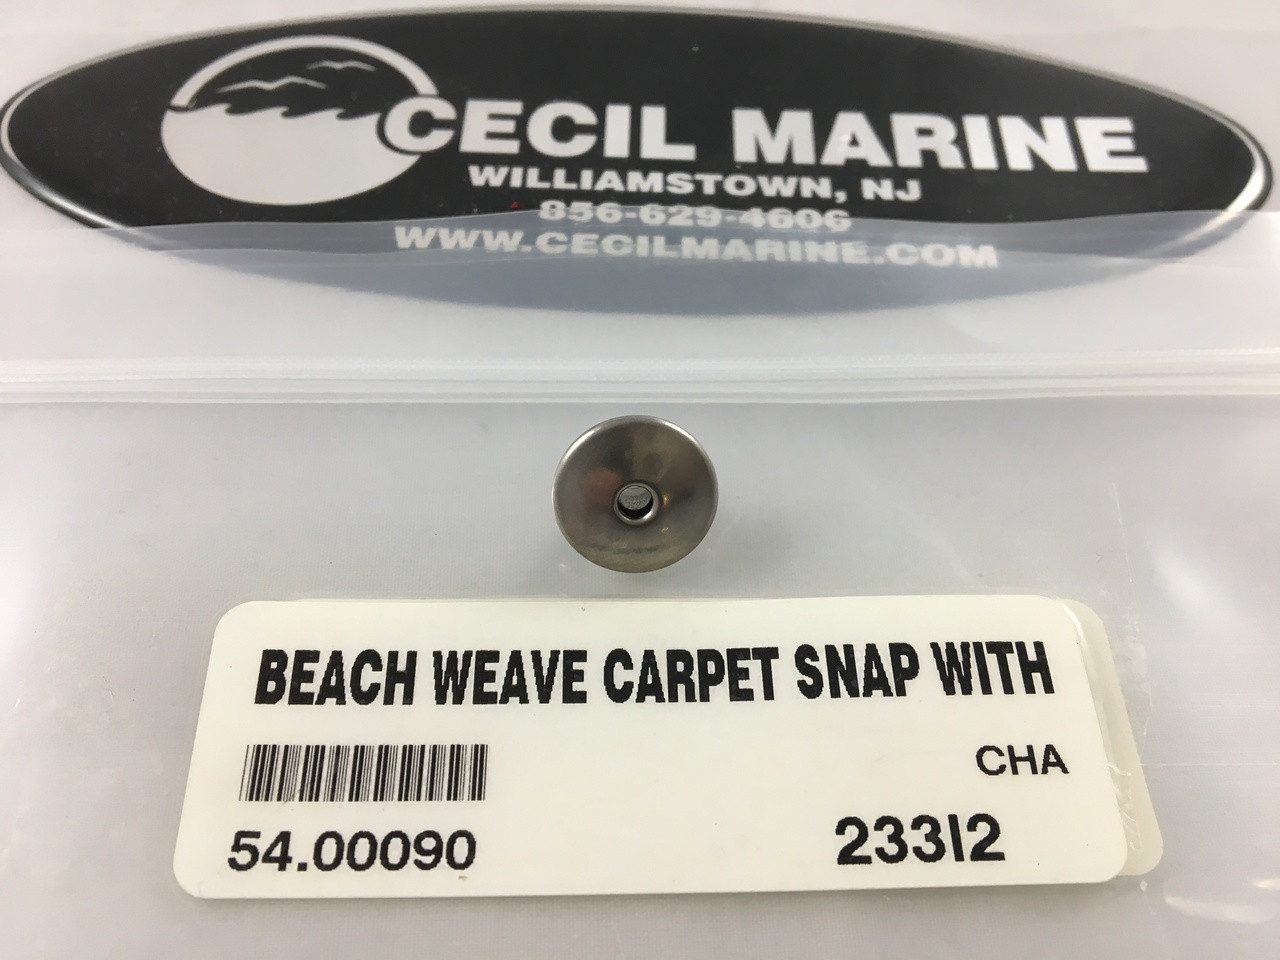 BEACH WEAVE CARPET SNAP WITH CENTER HOLE - 10 SNAPS PER BAG - 54.00090